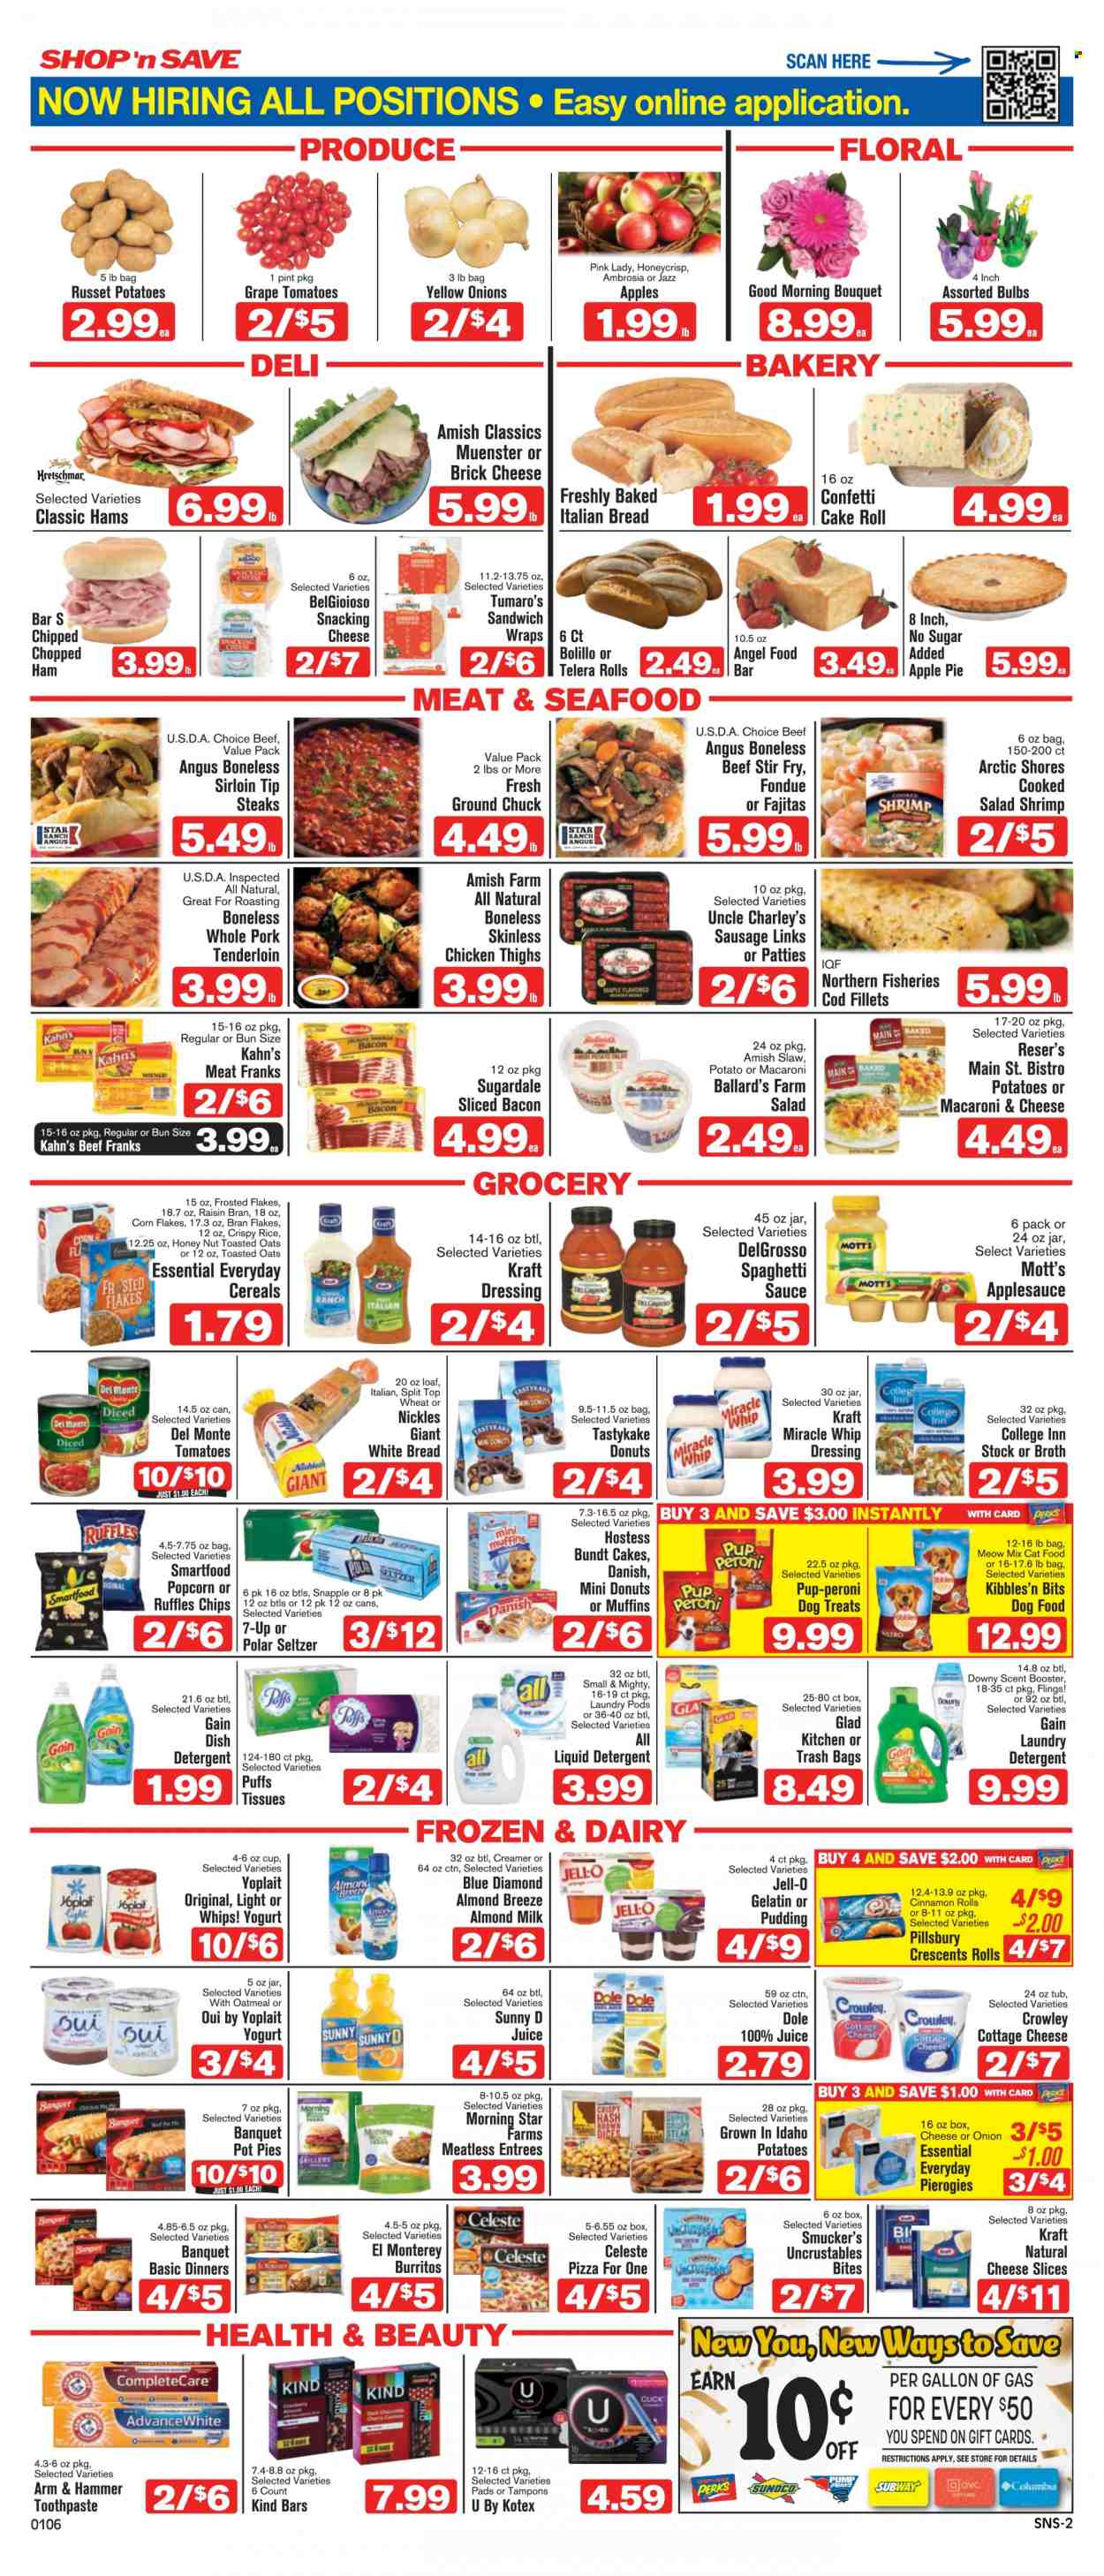 thumbnail - Shop ‘n Save Flyer - 01/06/2022 - 01/12/2022 - Sales products - bread, white bread, cake, pie, wraps, bundt, cinnamon roll, pot pie, puffs, donut, Angel Food, russet potatoes, potatoes, onion, Dole, Pink Lady, Mott's, chicken thighs, ground chuck, steak, pork meat, pork tenderloin, cod, shrimps, Arctic Shores, macaroni & cheese, spaghetti, pizza, sandwich, sauce, Pillsbury, fajita, burrito, Kraft®, spaghetti sauce, Sugardale, bacon, ham, sausage, brick cheese, cottage cheese, sliced cheese, Münster cheese, pudding, yoghurt, Yoplait, almond milk, Almond Breeze, creamer, Miracle Whip, Celeste, Smartfood, popcorn, Ruffles, ARM & HAMMER, oatmeal, Jell-O, broth, cereals, corn flakes, bran flakes, Frosted Flakes, Raisin Bran, toasted oats, dressing, apple sauce, Blue Diamond, juice, 7UP, Snapple, seltzer water, tissues, detergent, Gain, liquid detergent, laundry detergent, toothpaste, gelatin. Page 2.